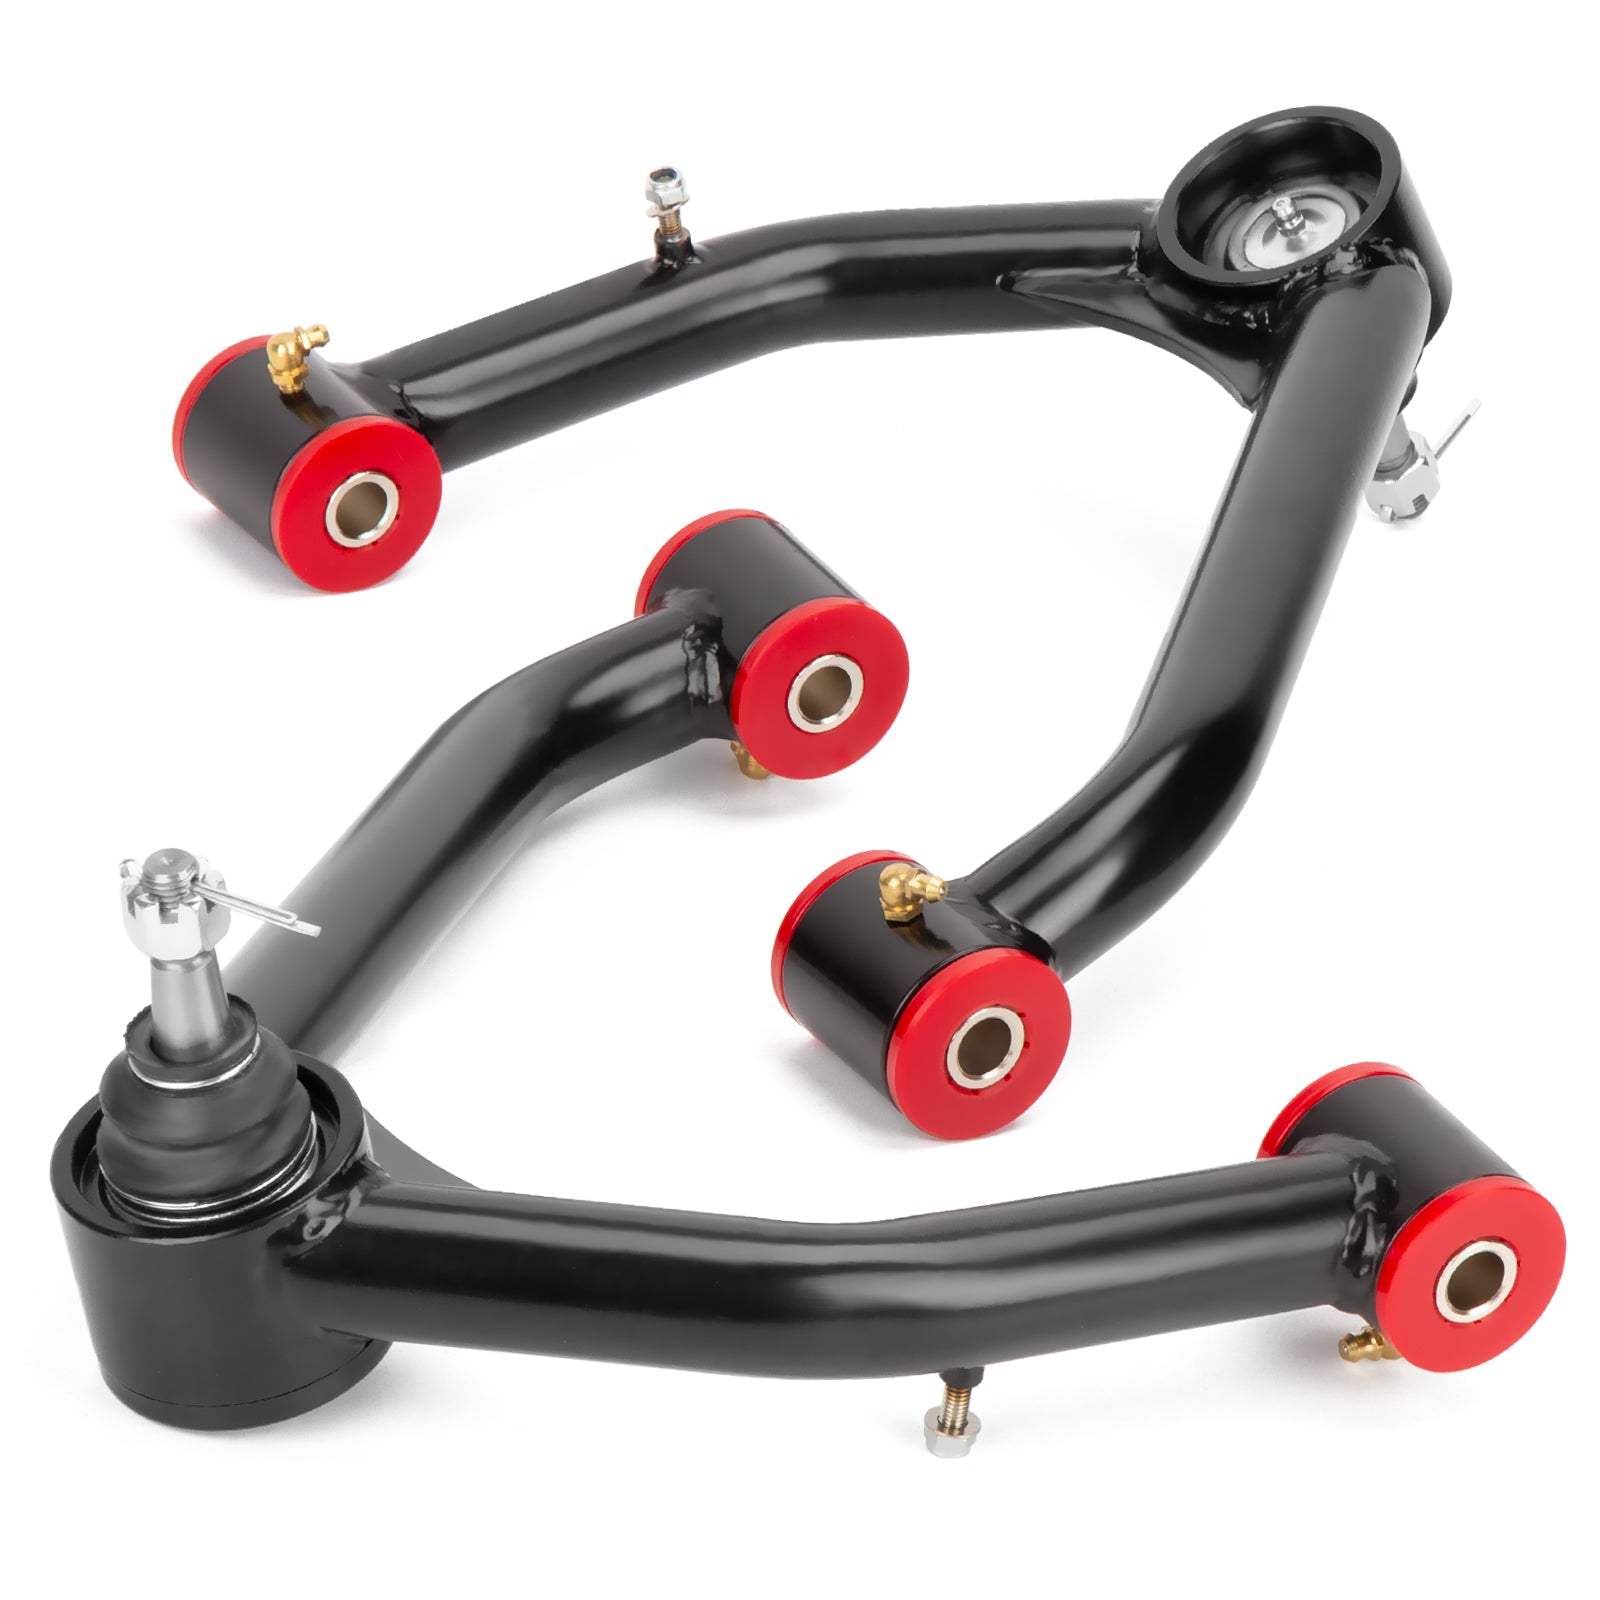 Chevy Control Arms For 2007-2016 Silverado 1500 2"-4" Lifted xccscss.